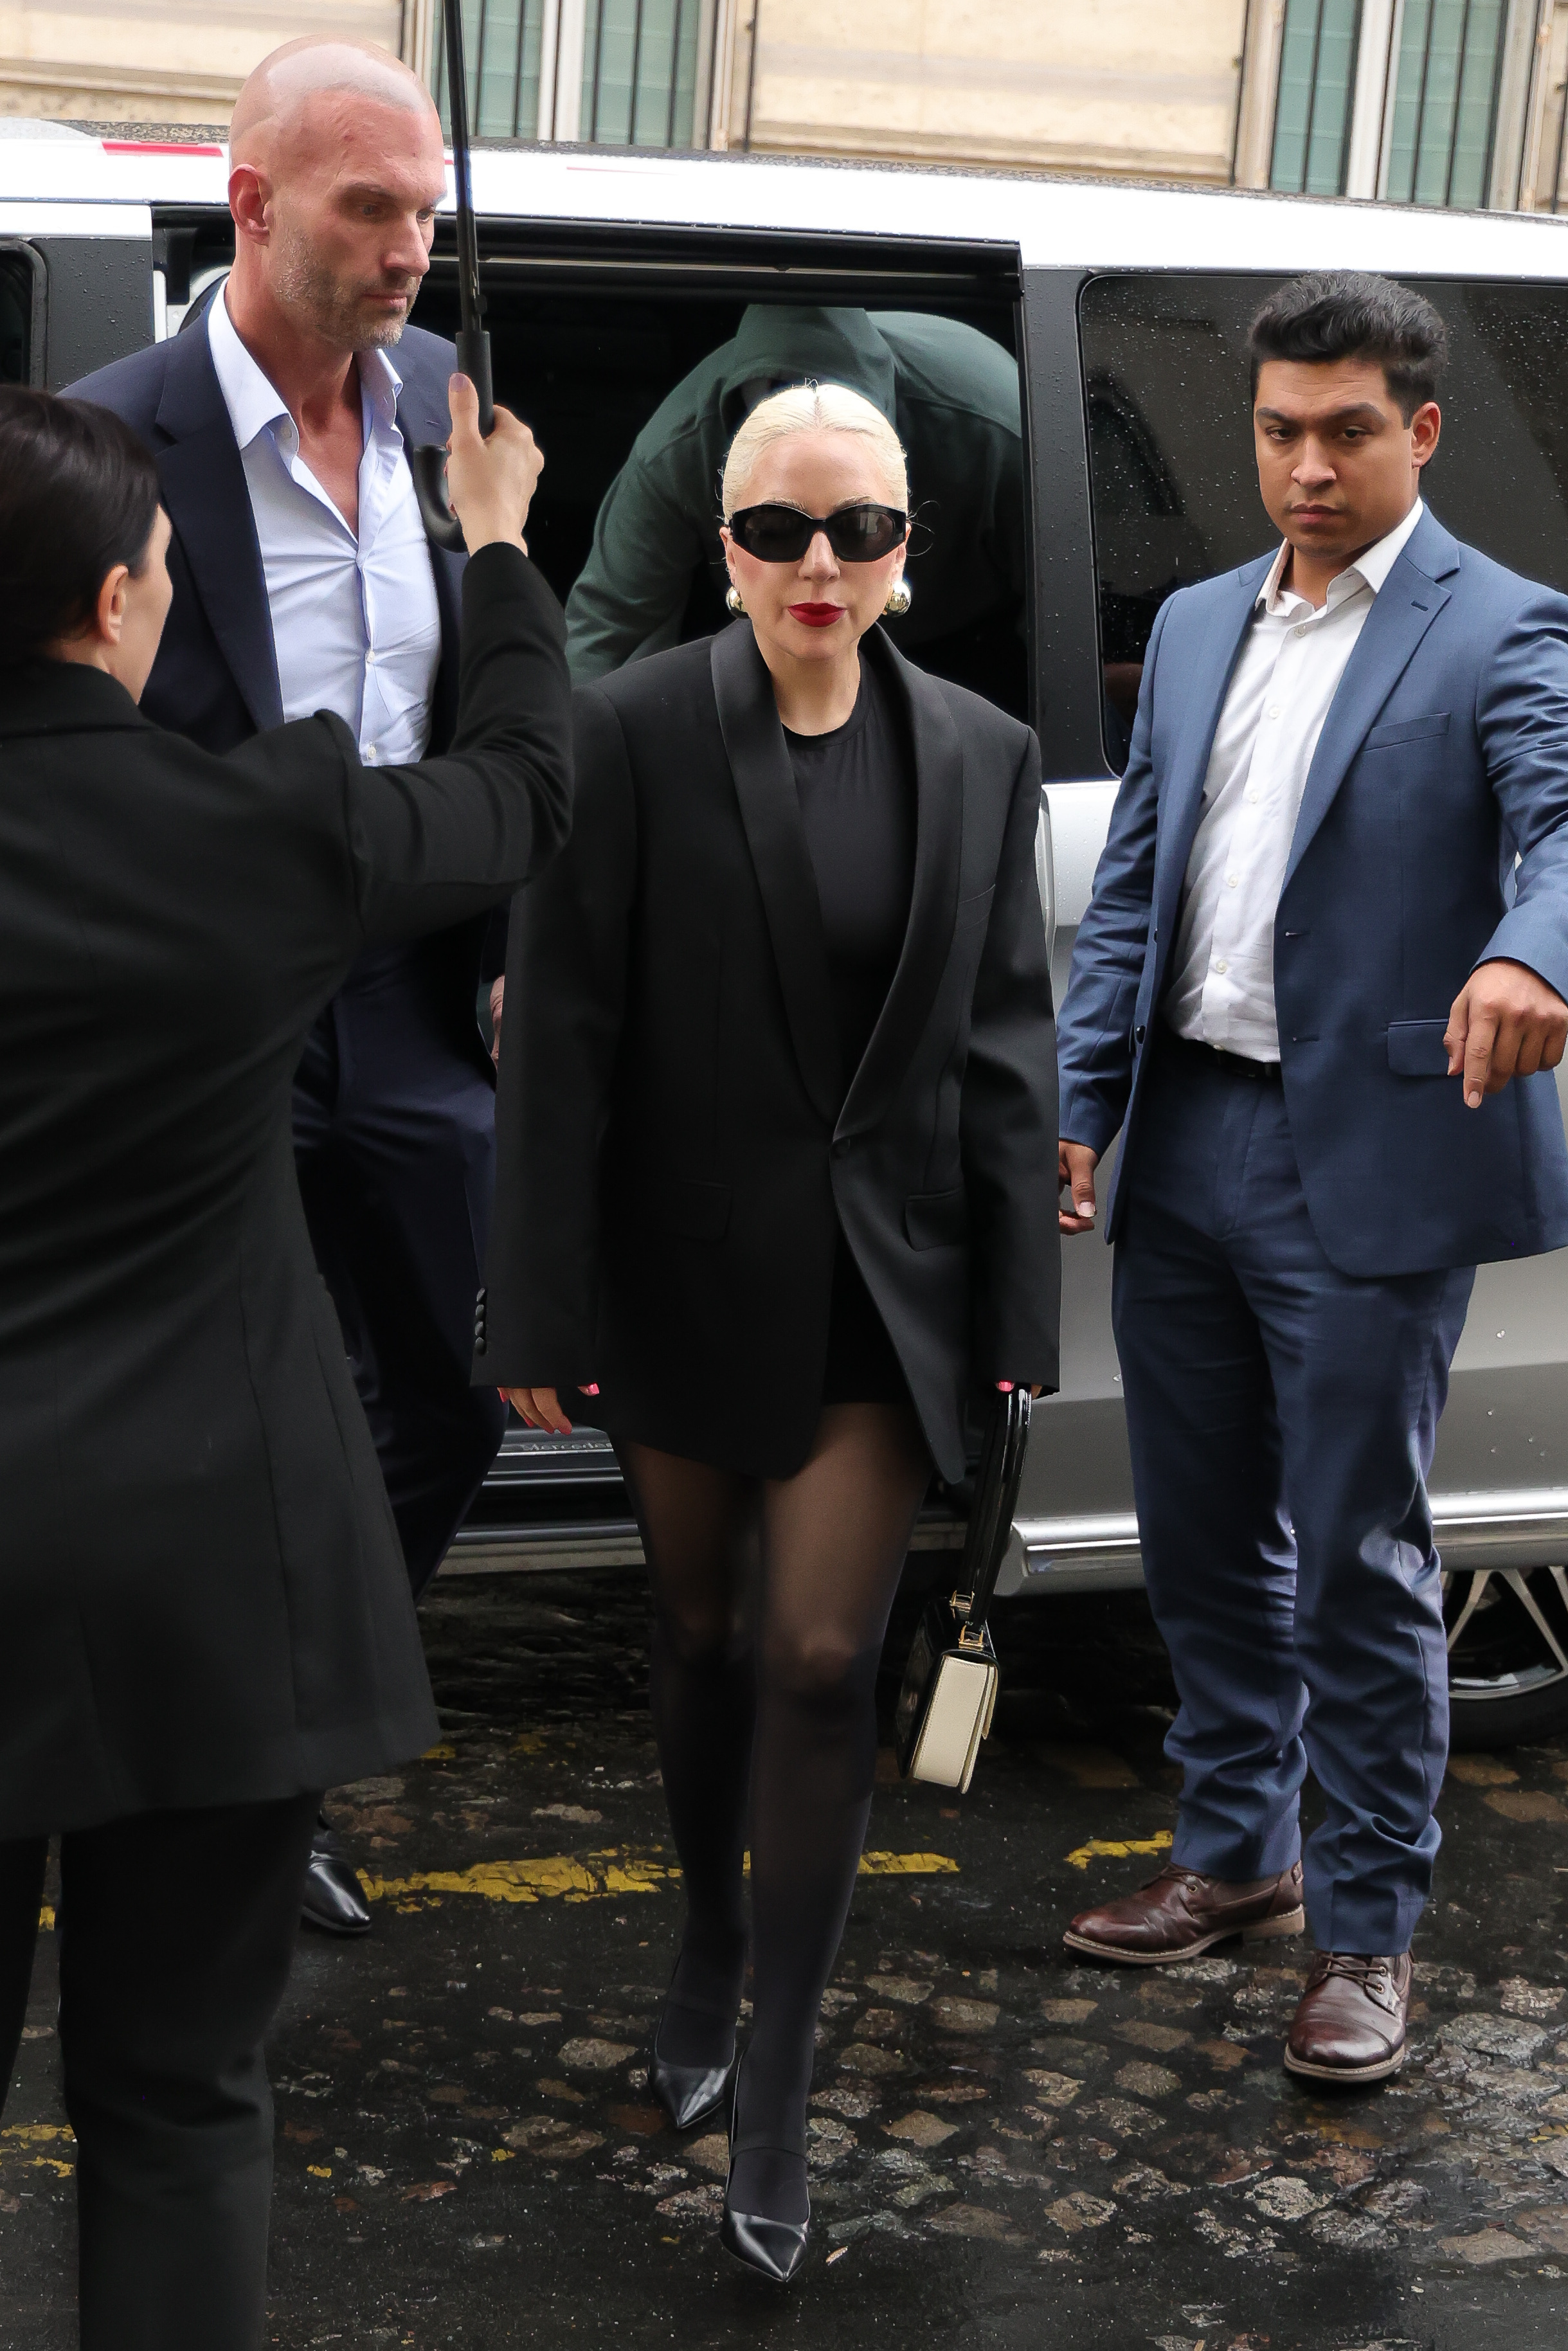 Lady Gaga arriving at the Dior store in Paris, France